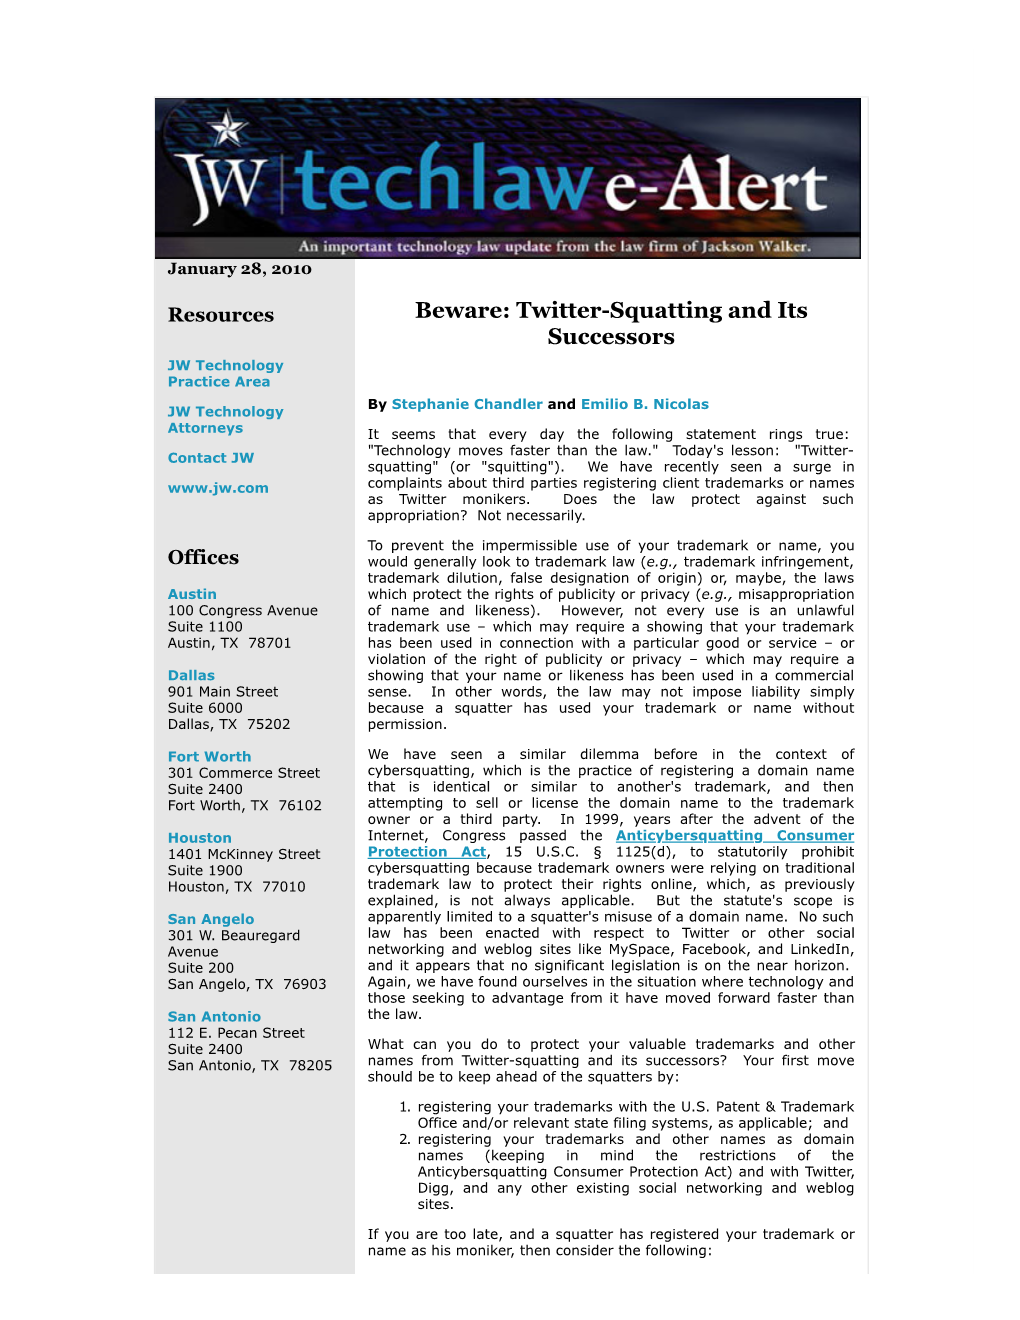 Beware: Twitter-Squatting and Its Successors JW Technology Practice Area by Stephanie Chandler and Emilio B